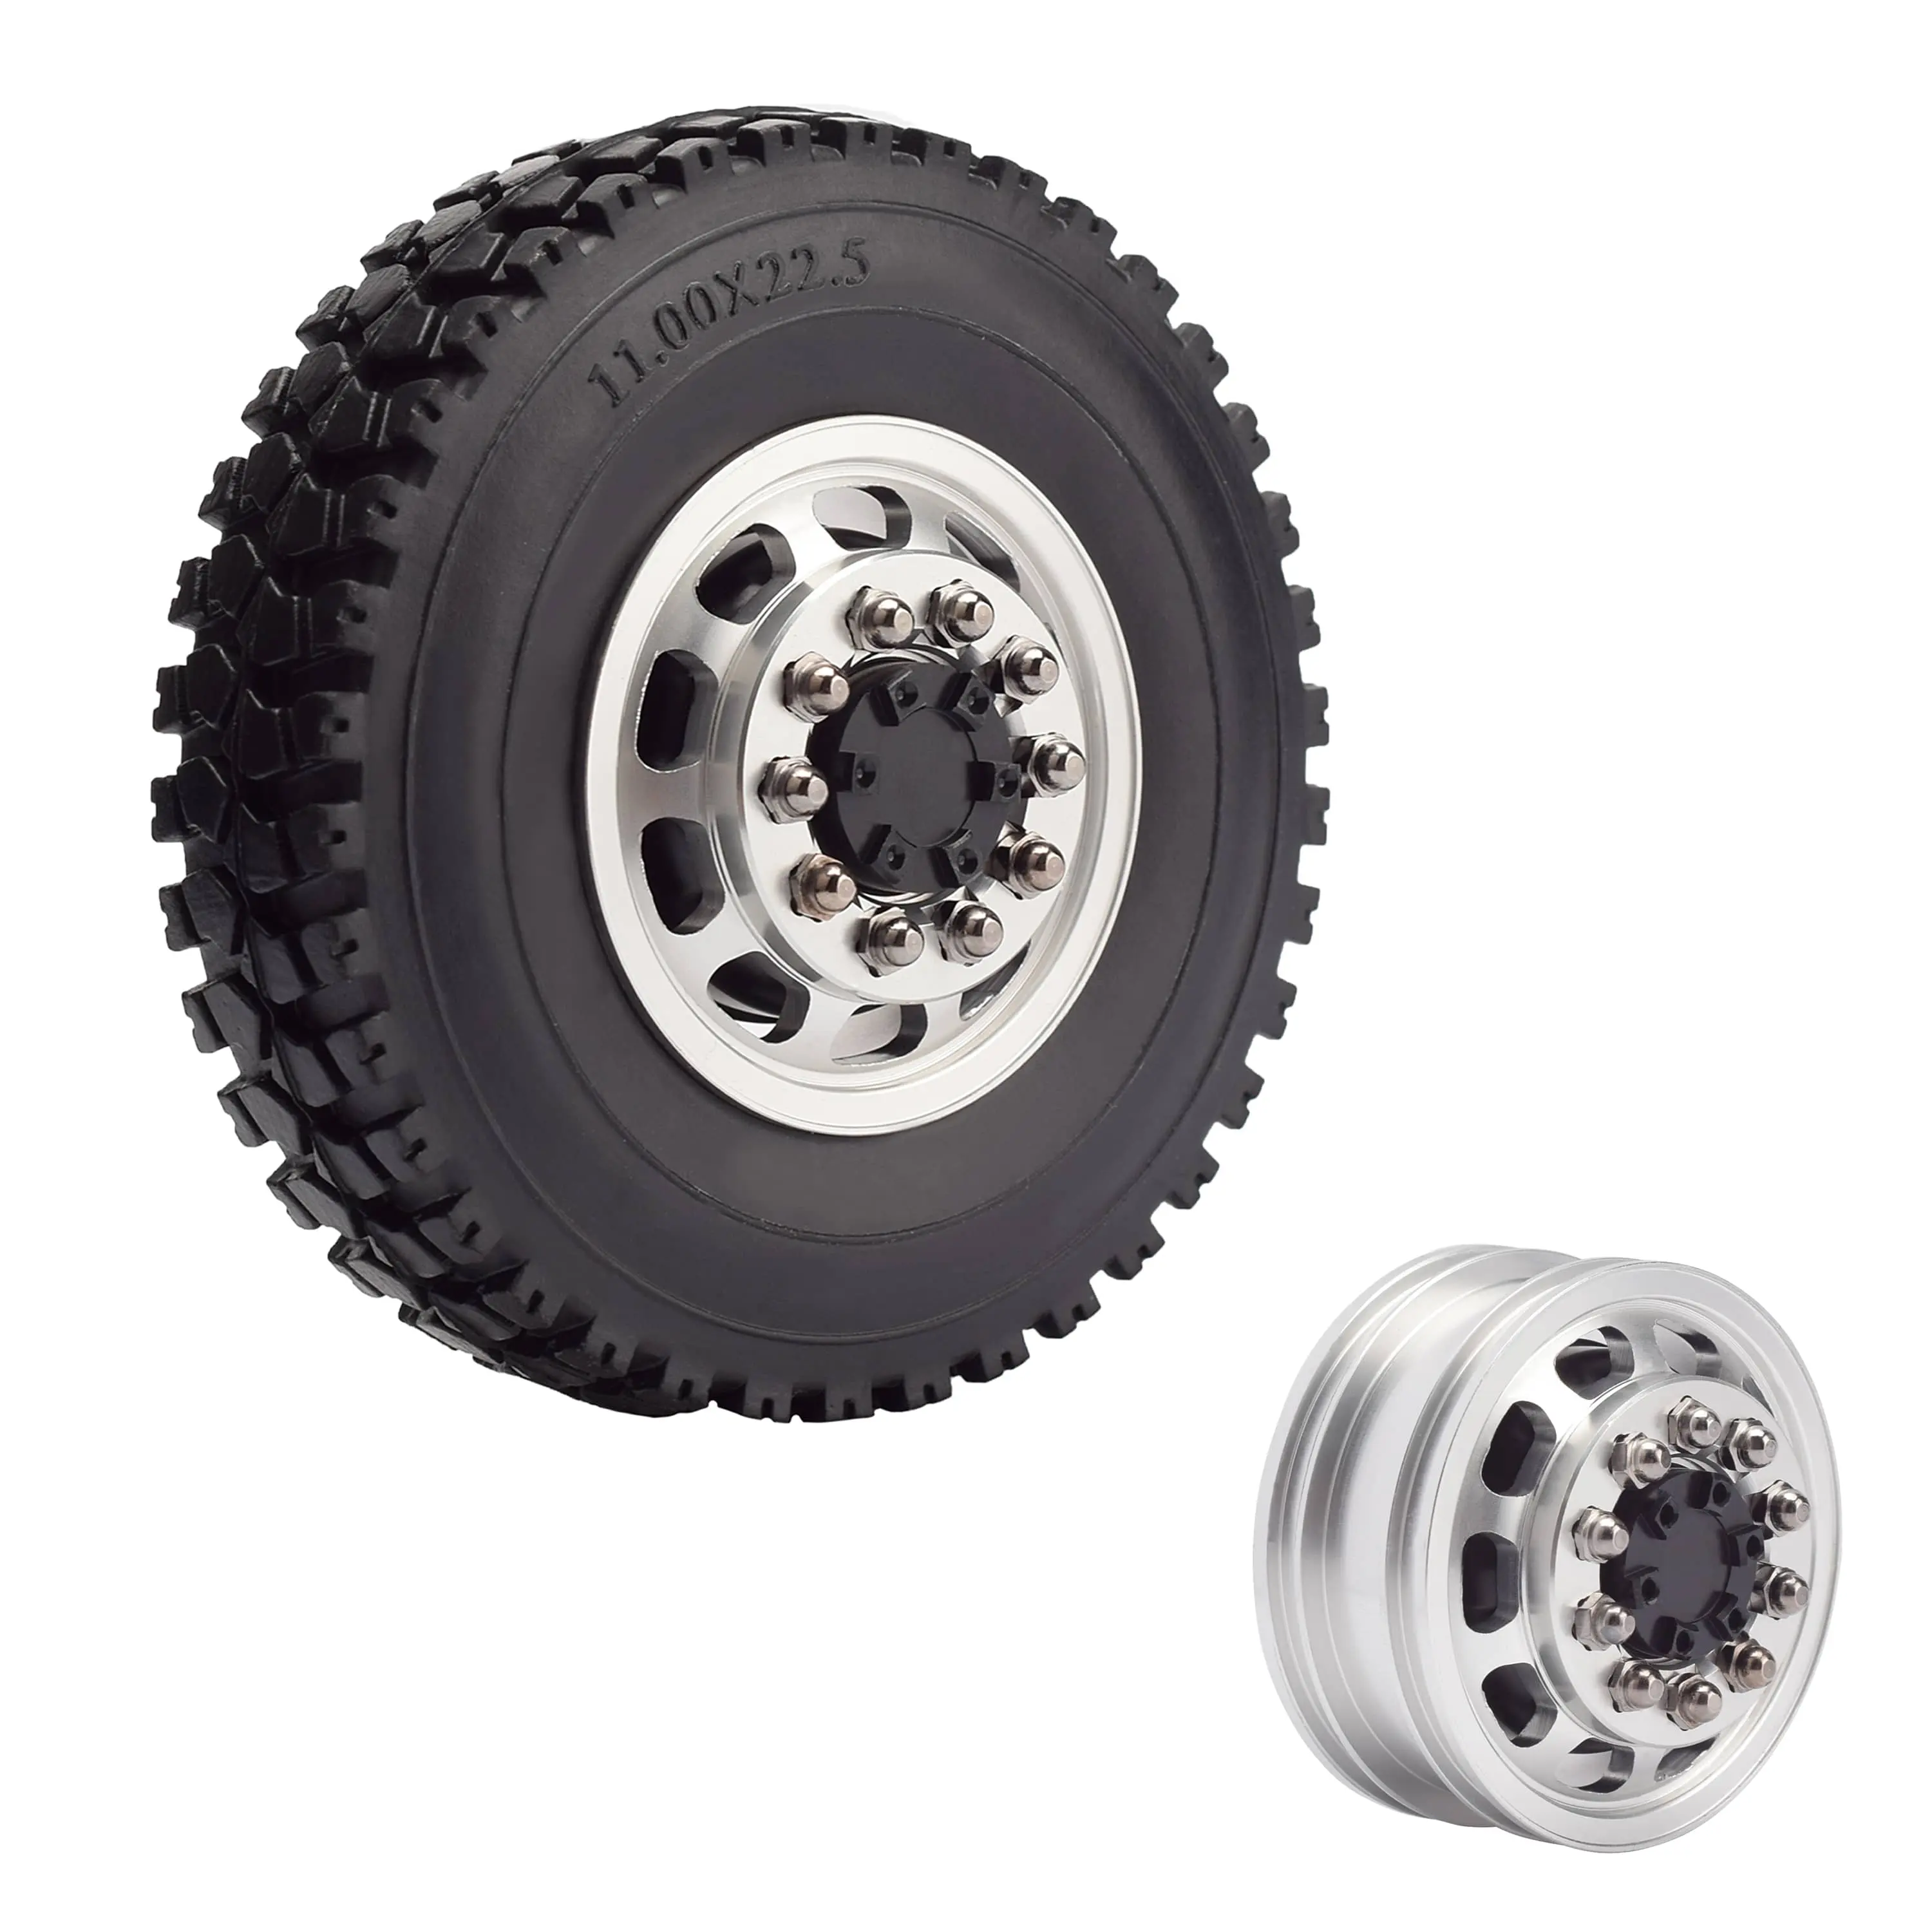 RC 1/14 Front Truck Rubber Wheel Tires Aluminum Rims For Tamiya Tractor SEMI Trailer